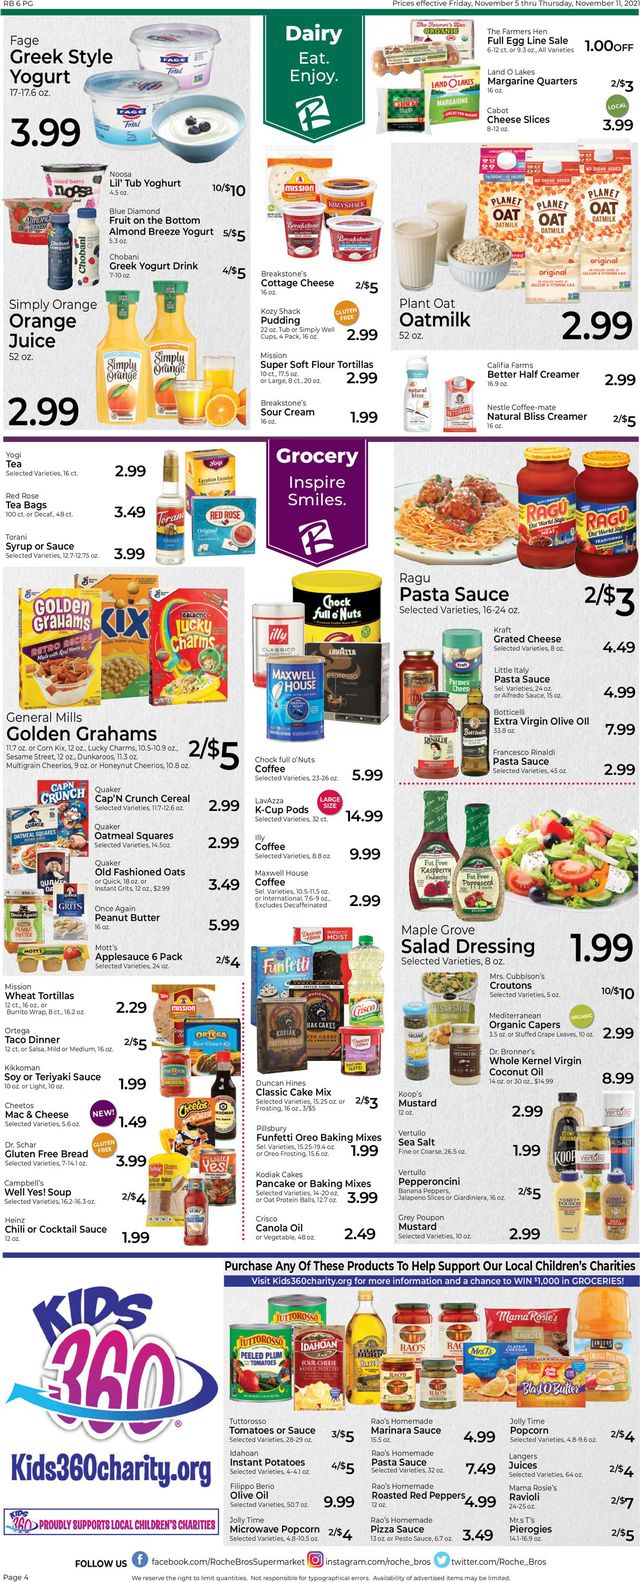 Roche Bros. Supermarkets Ad from 11/05/2021